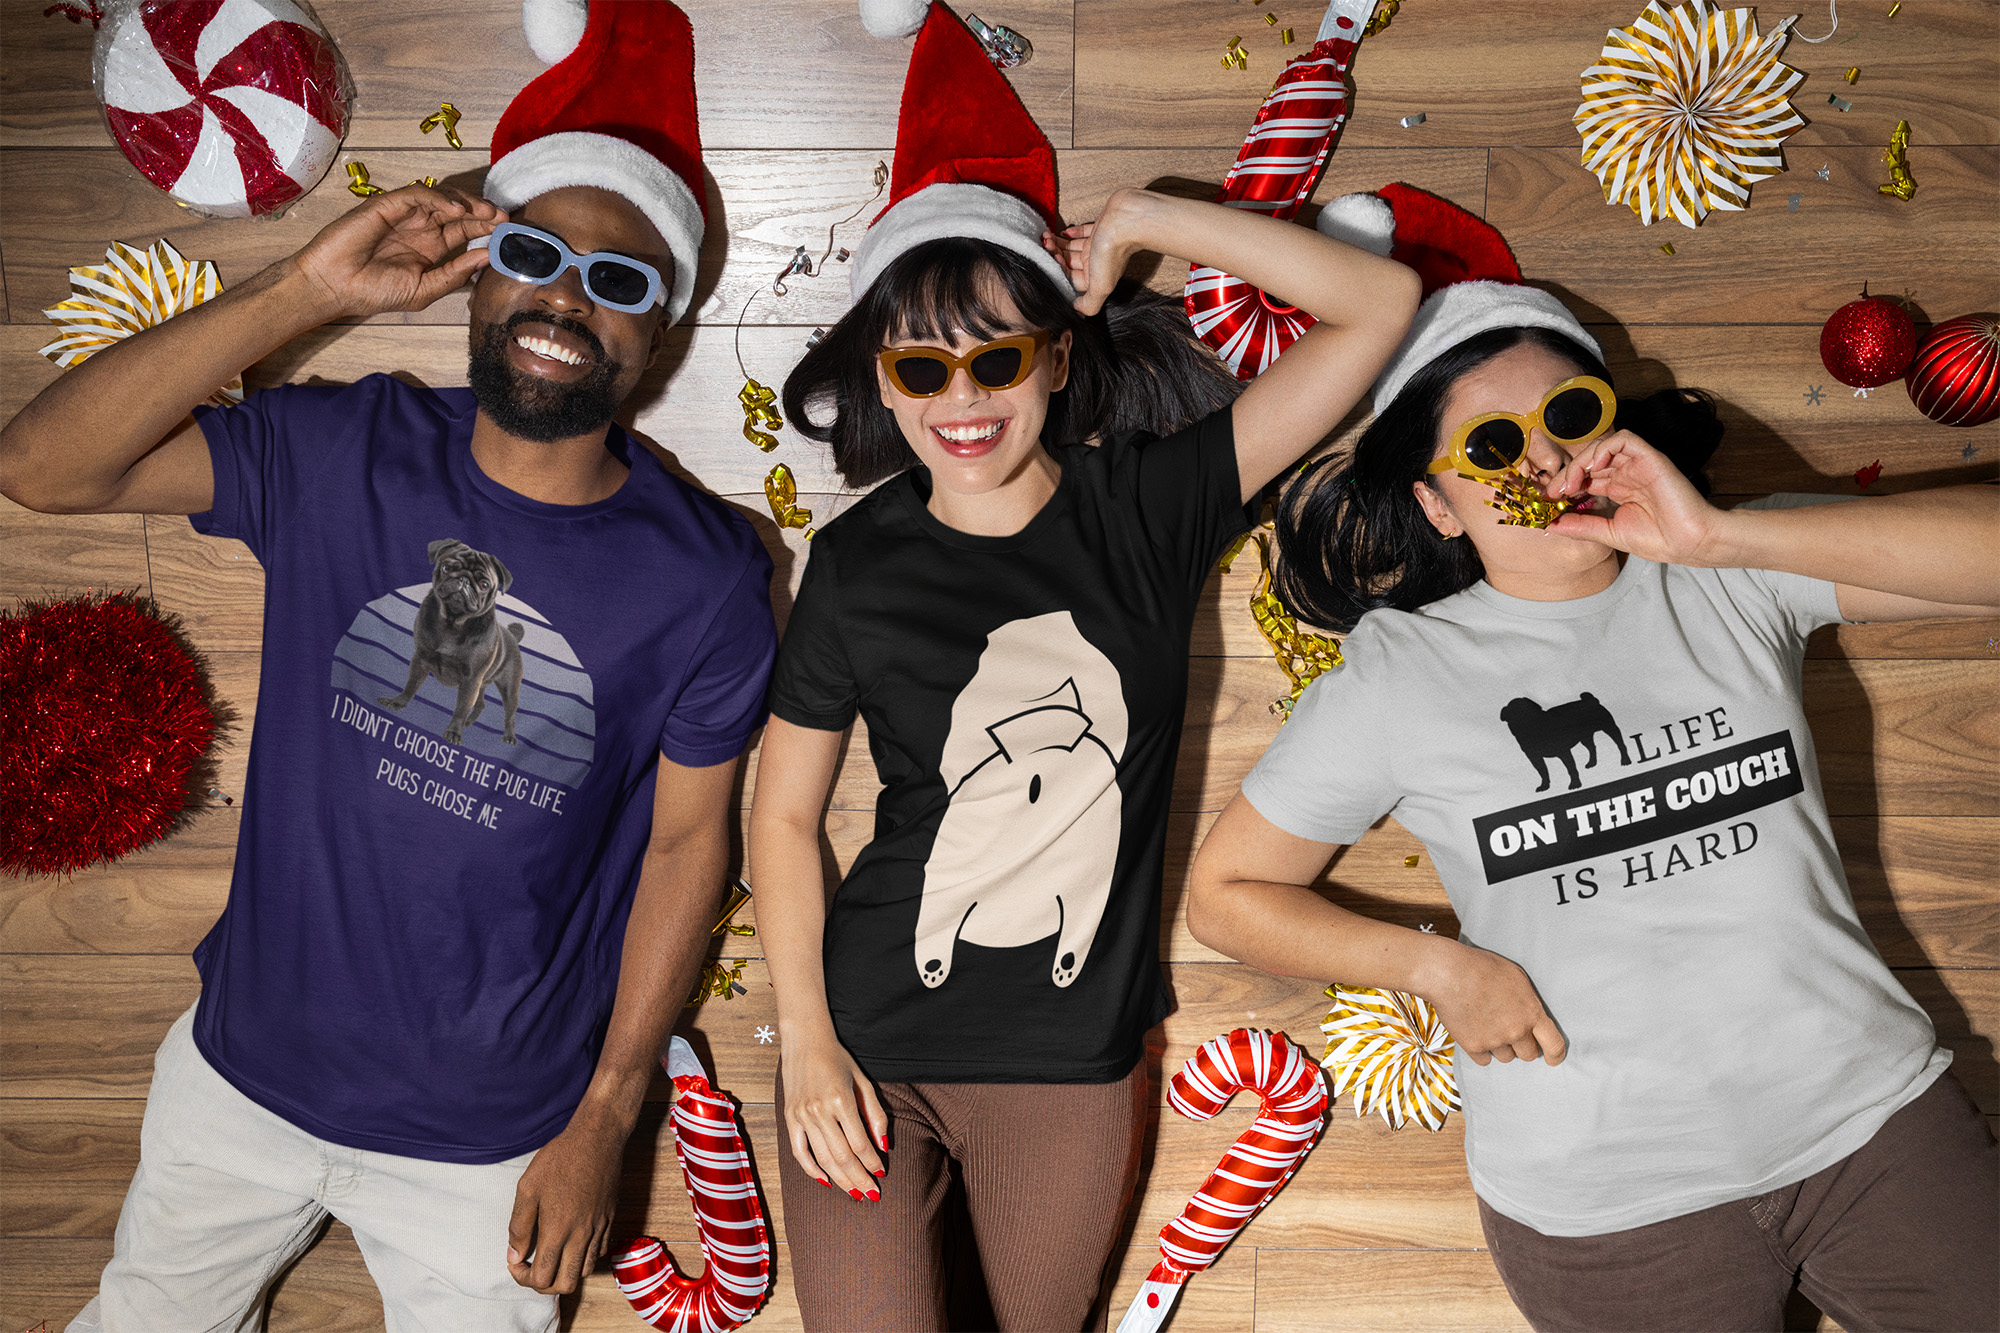 Three people laying on a hardwood floor wearing Christmas hats. Large stuffed candy canes are scattered around them. All three are wearing pug life t-shirts.